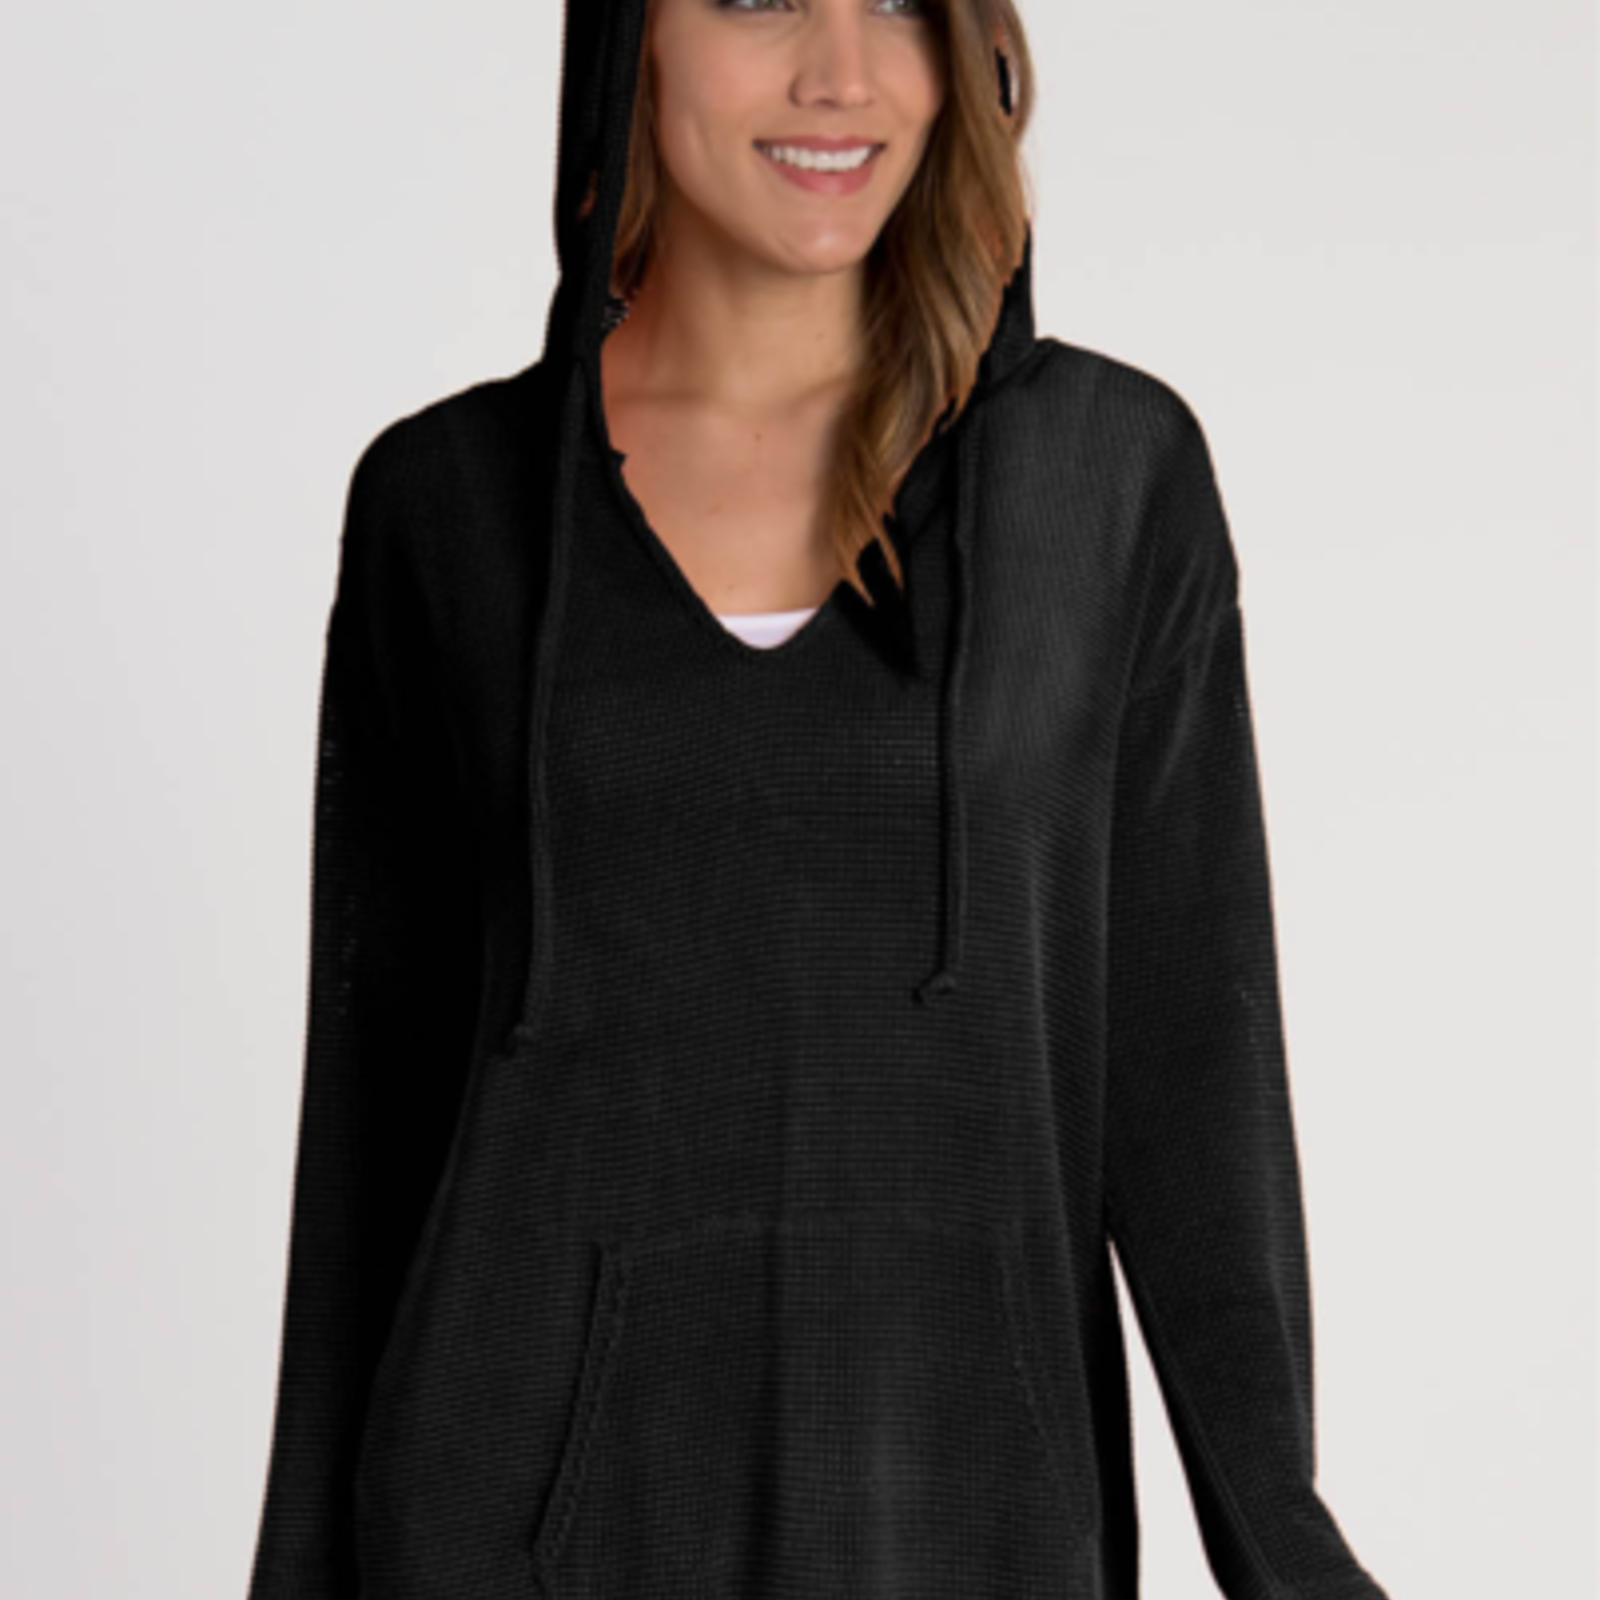 Simply Noelle Hooded Knit Pullover - L/XL Black   TOP7019ALXBLACK loading=